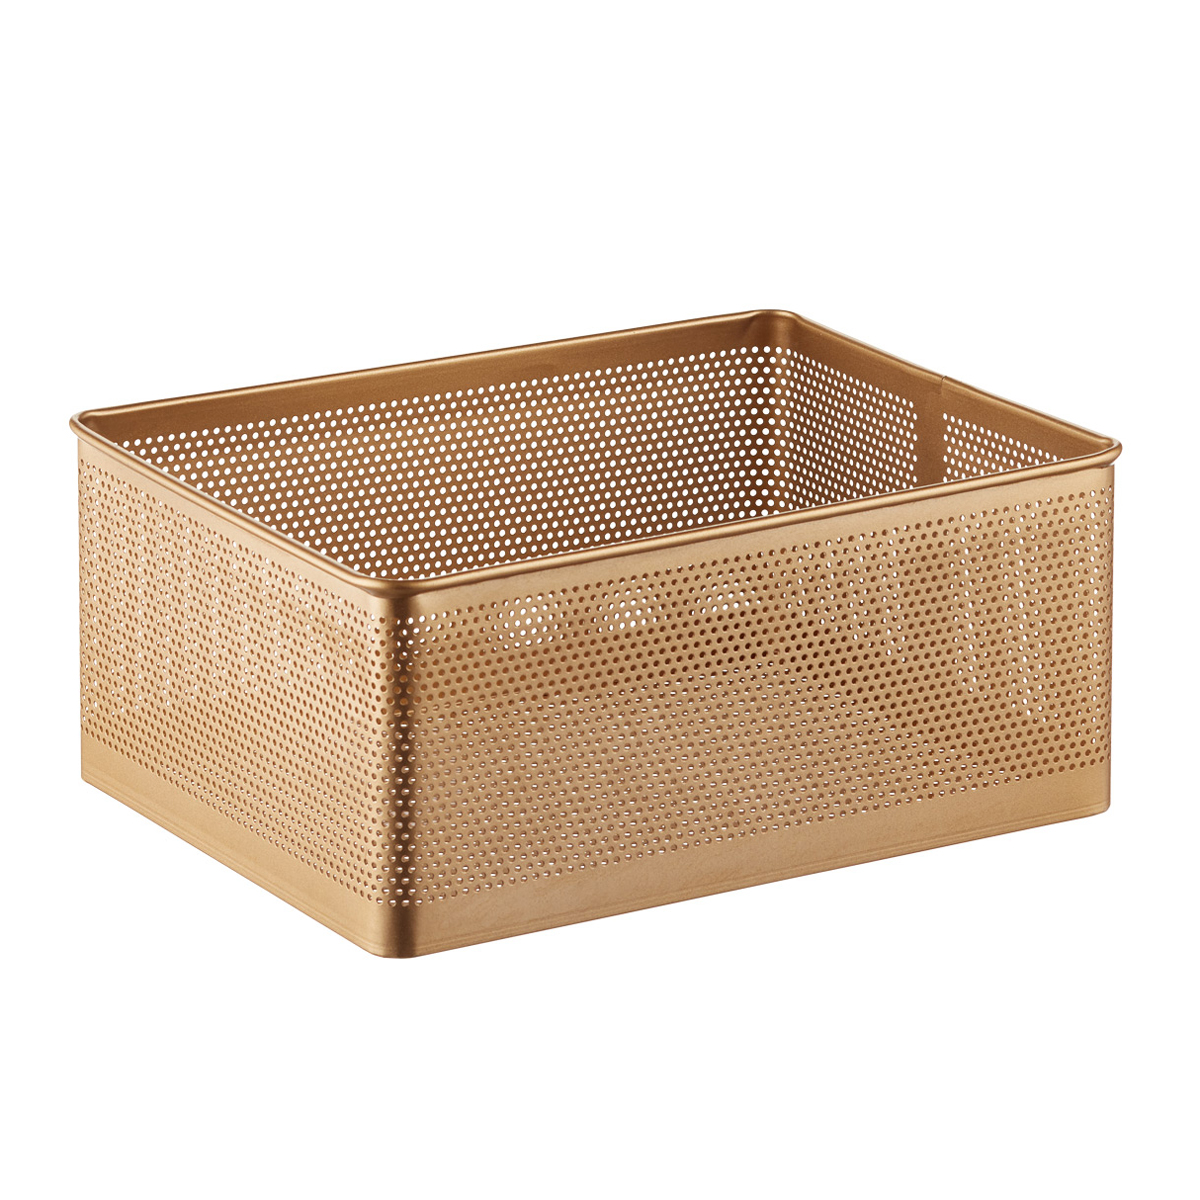 The Container Store Wide Serena Stamped Metal Bin Gold